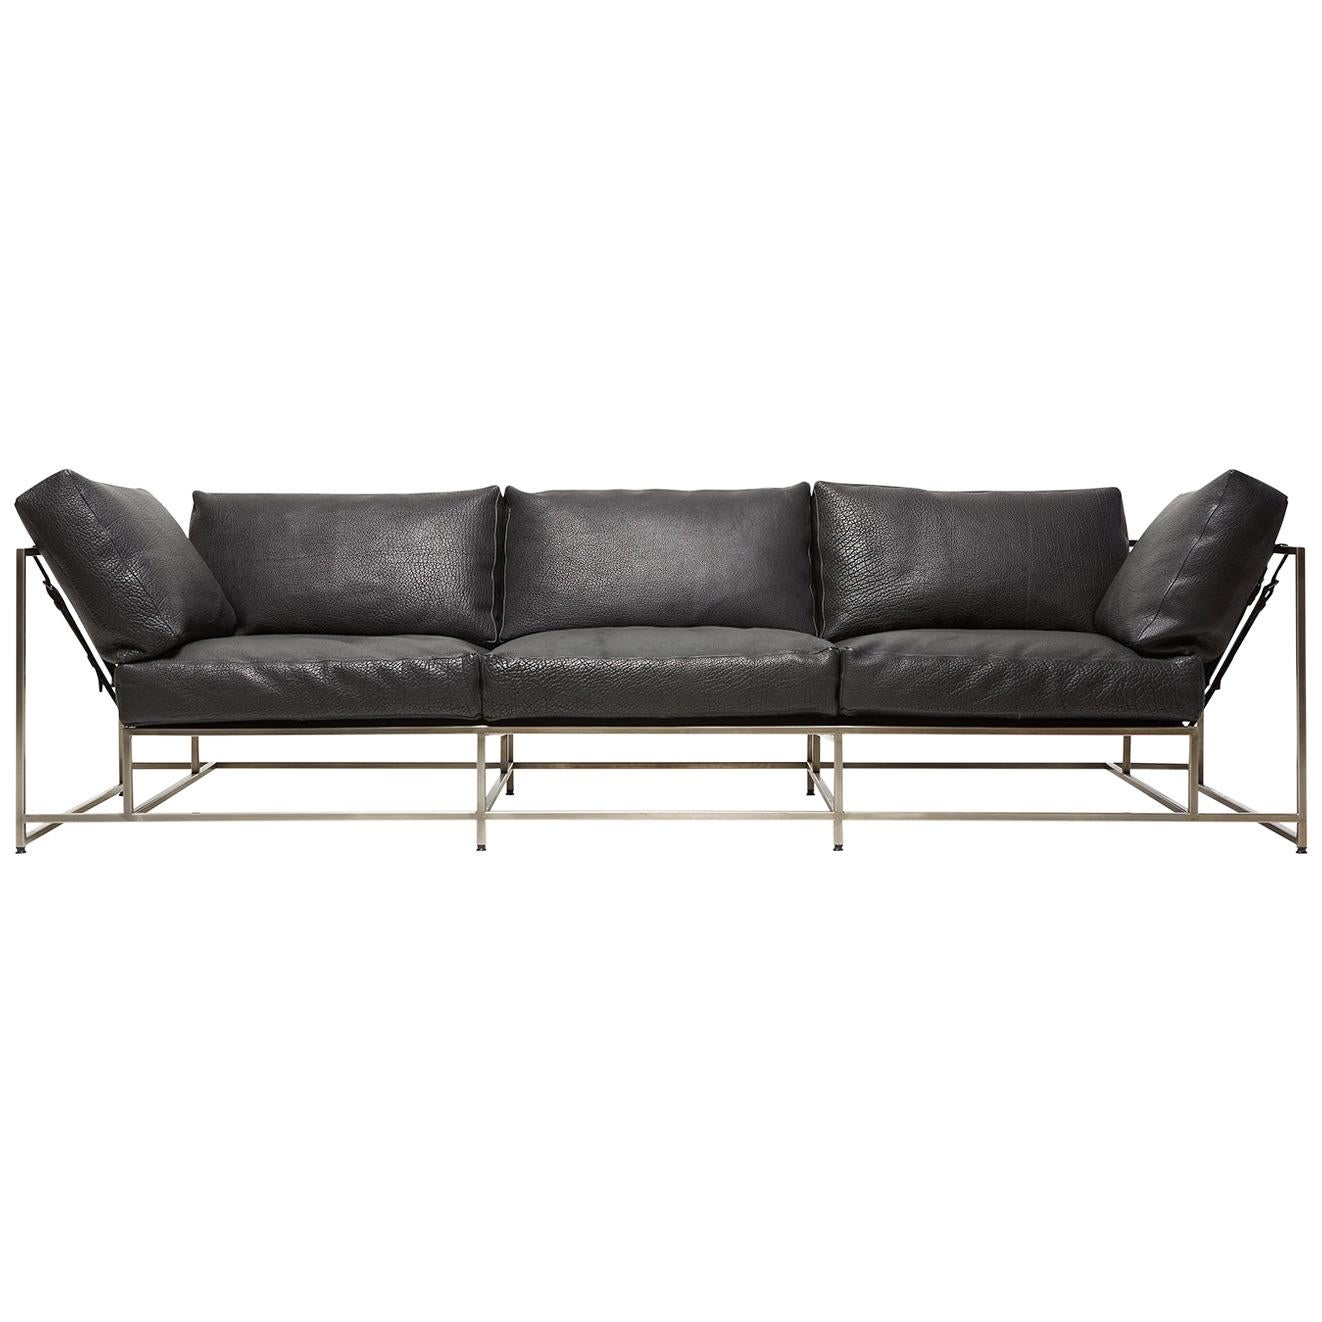 Black Bison Leather and Antique Nickel Sofa For Sale